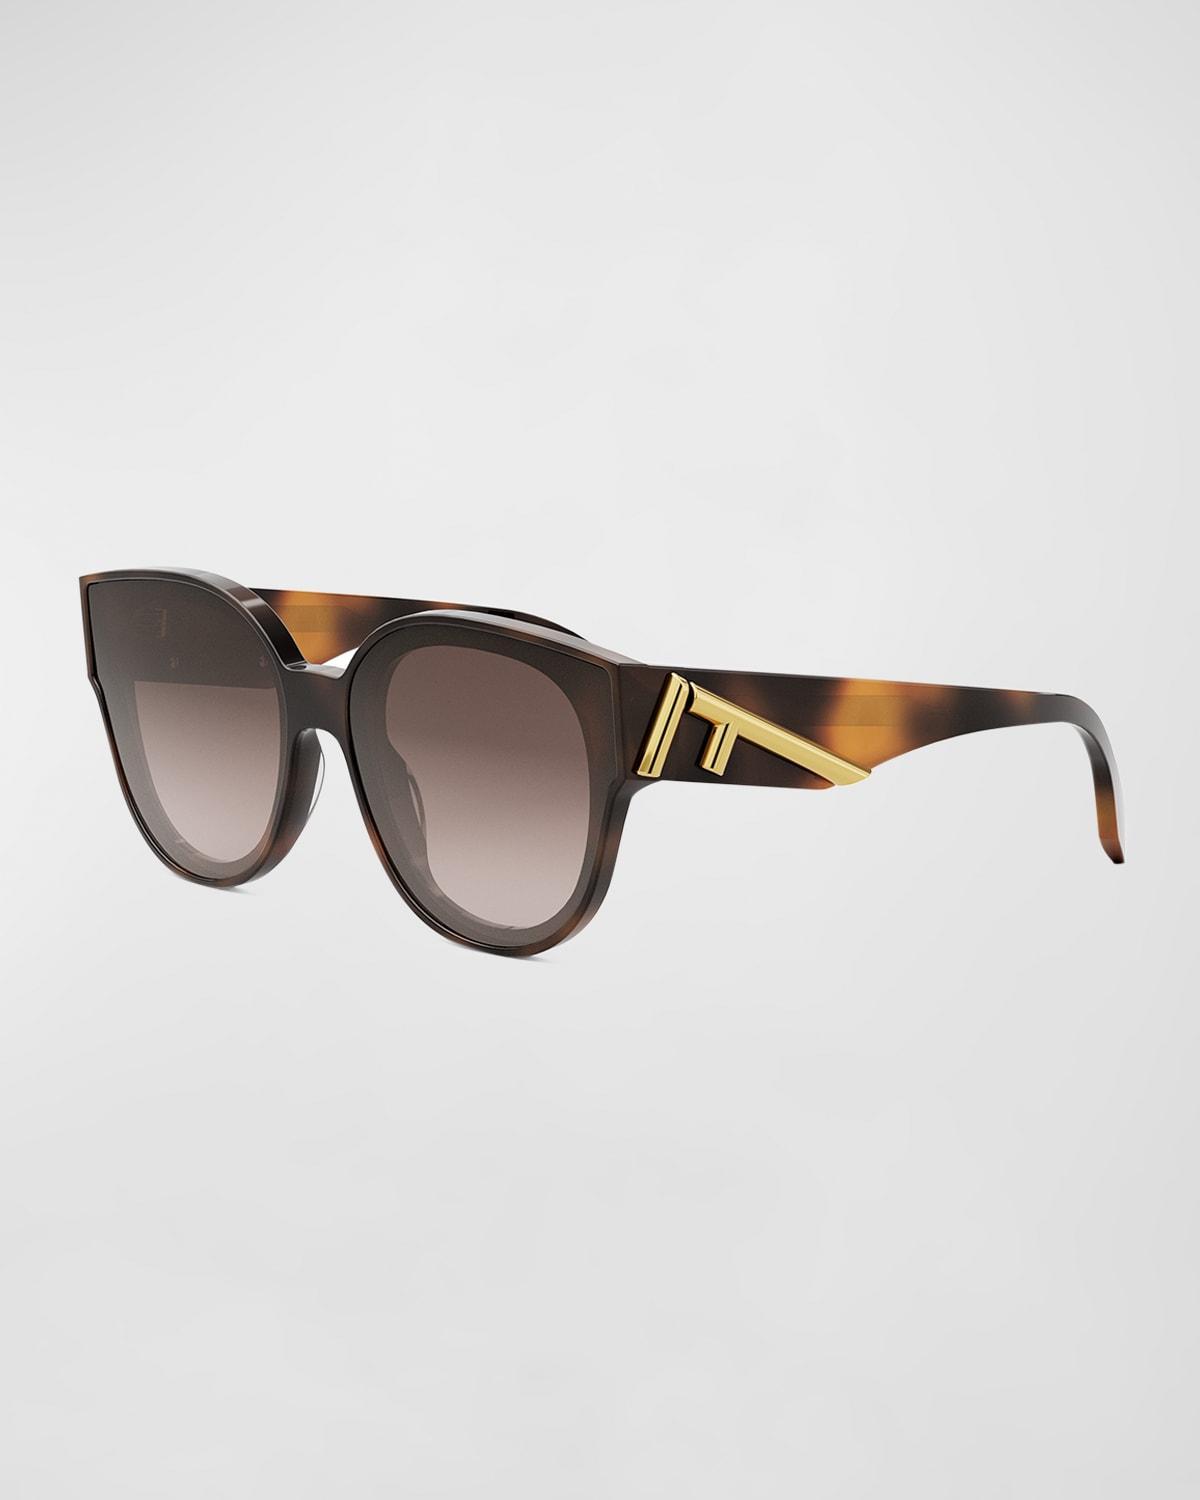 The Fendi First 63mm Gradient Oversize Square Sunglasses Product Image